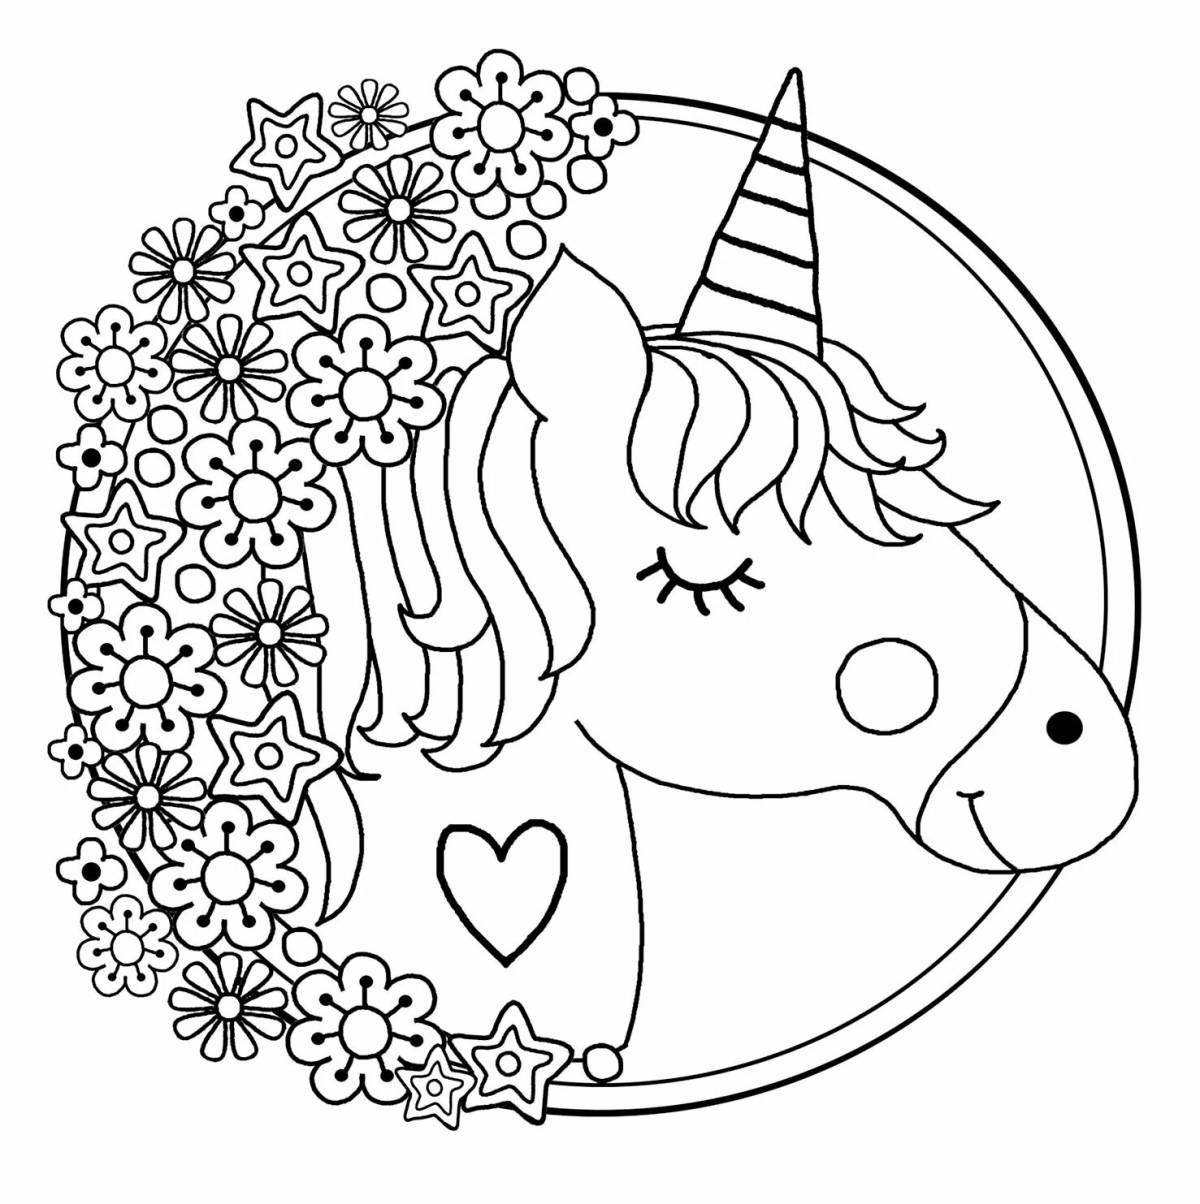 Elegant unicorn coloring book for 5 year old girls